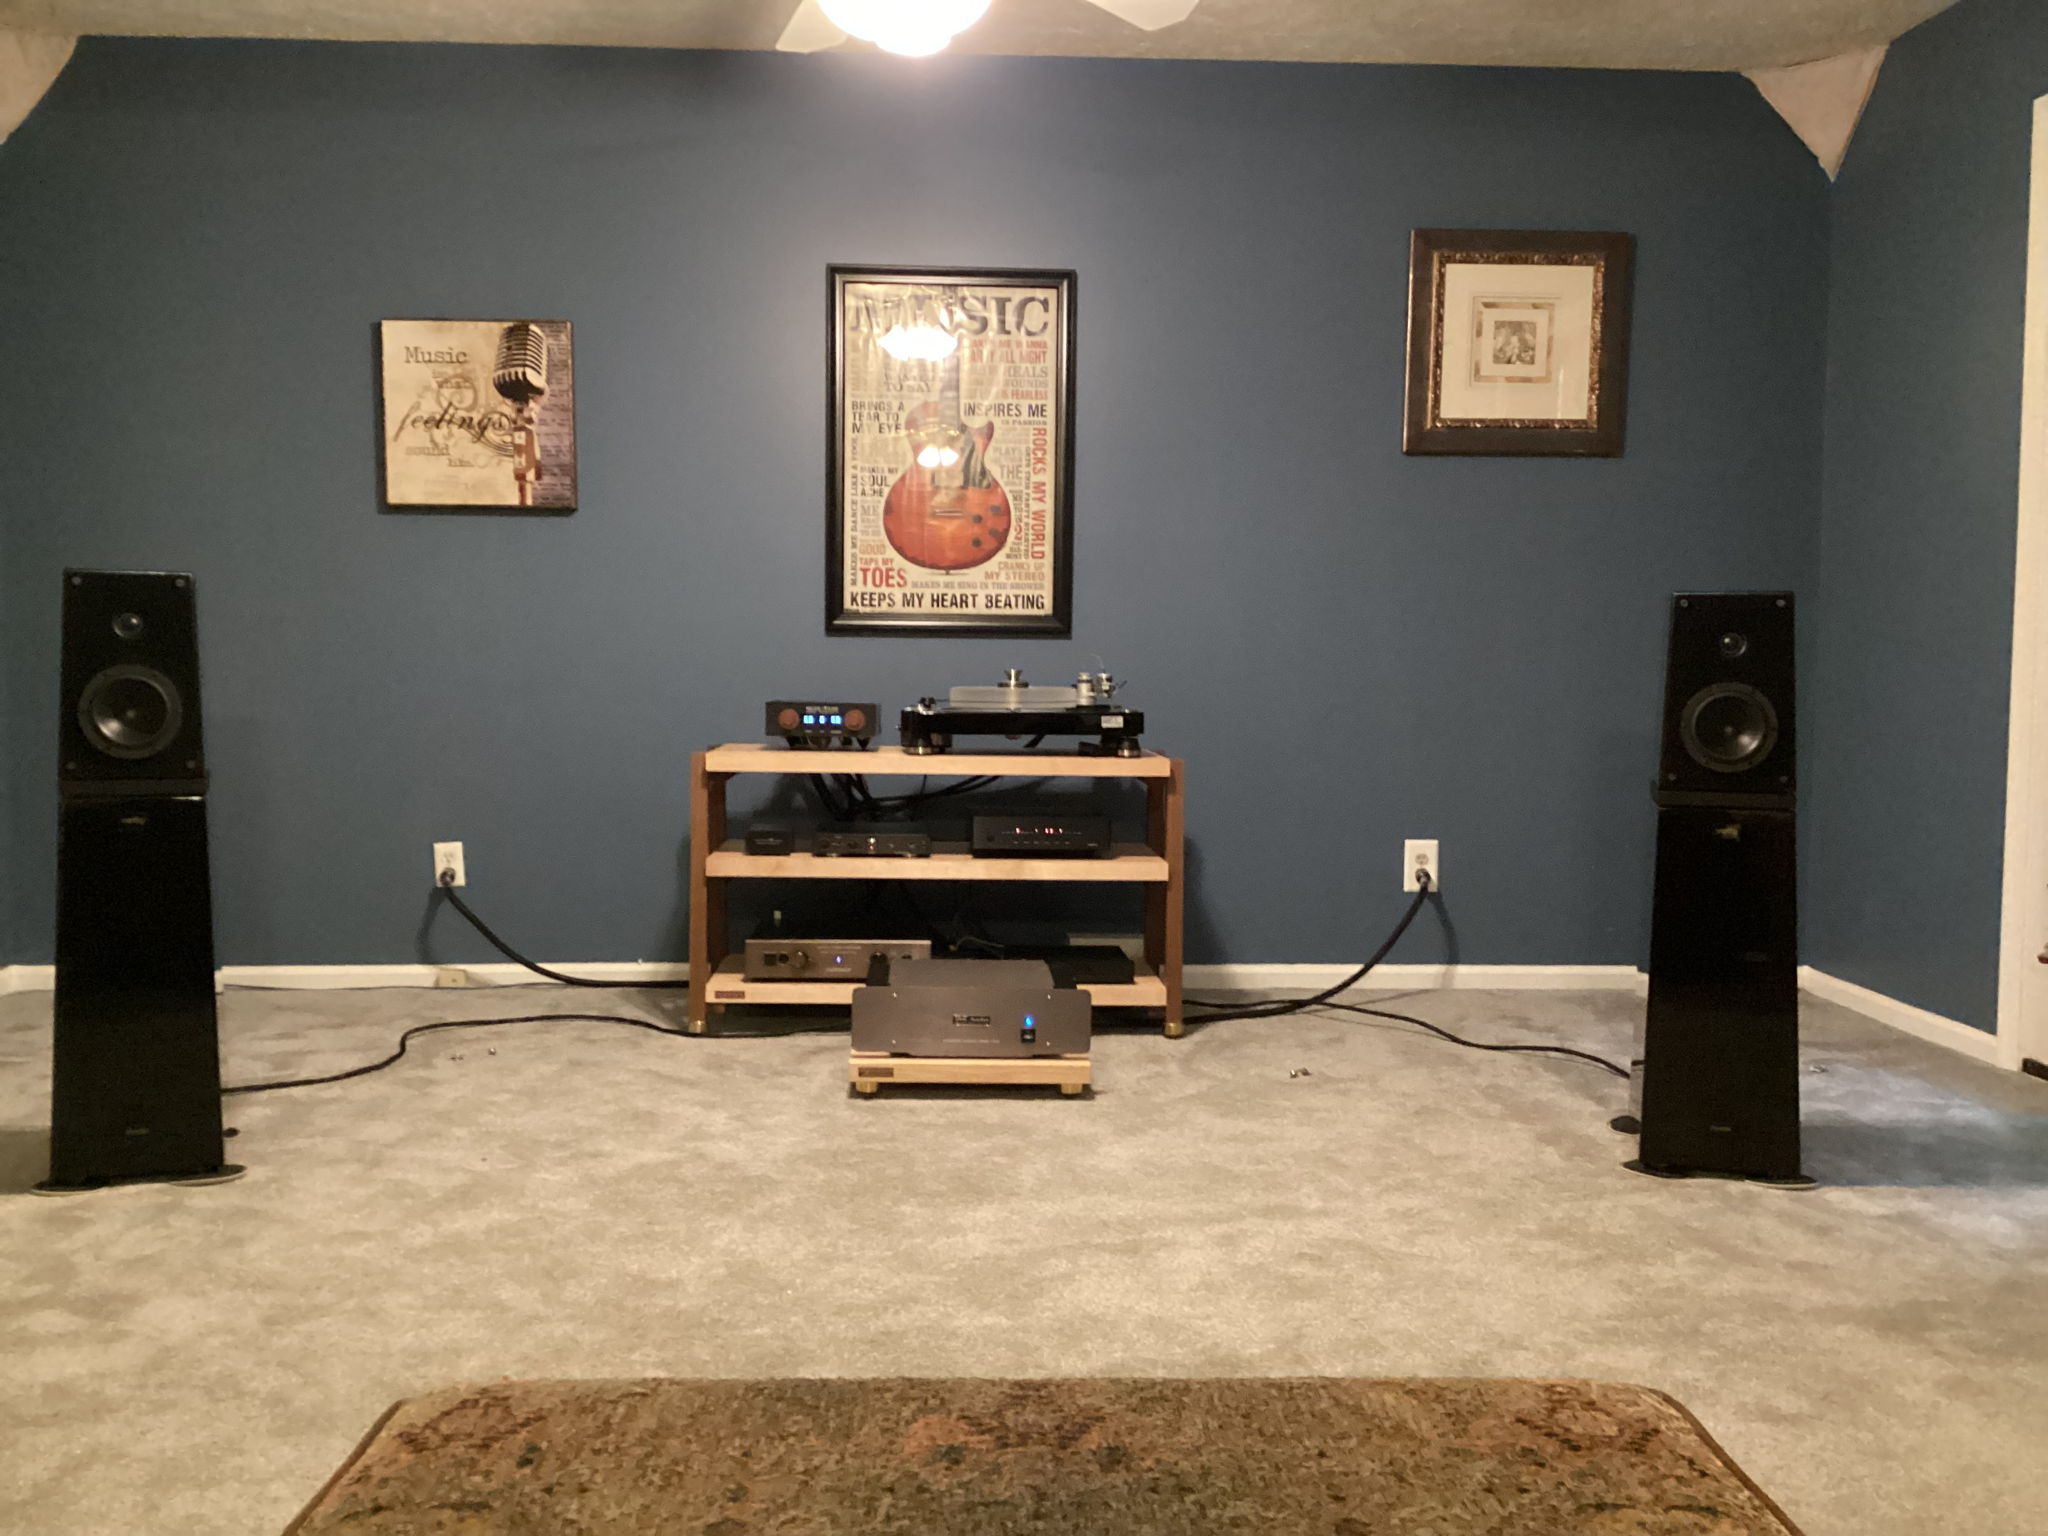 ozzy62's System